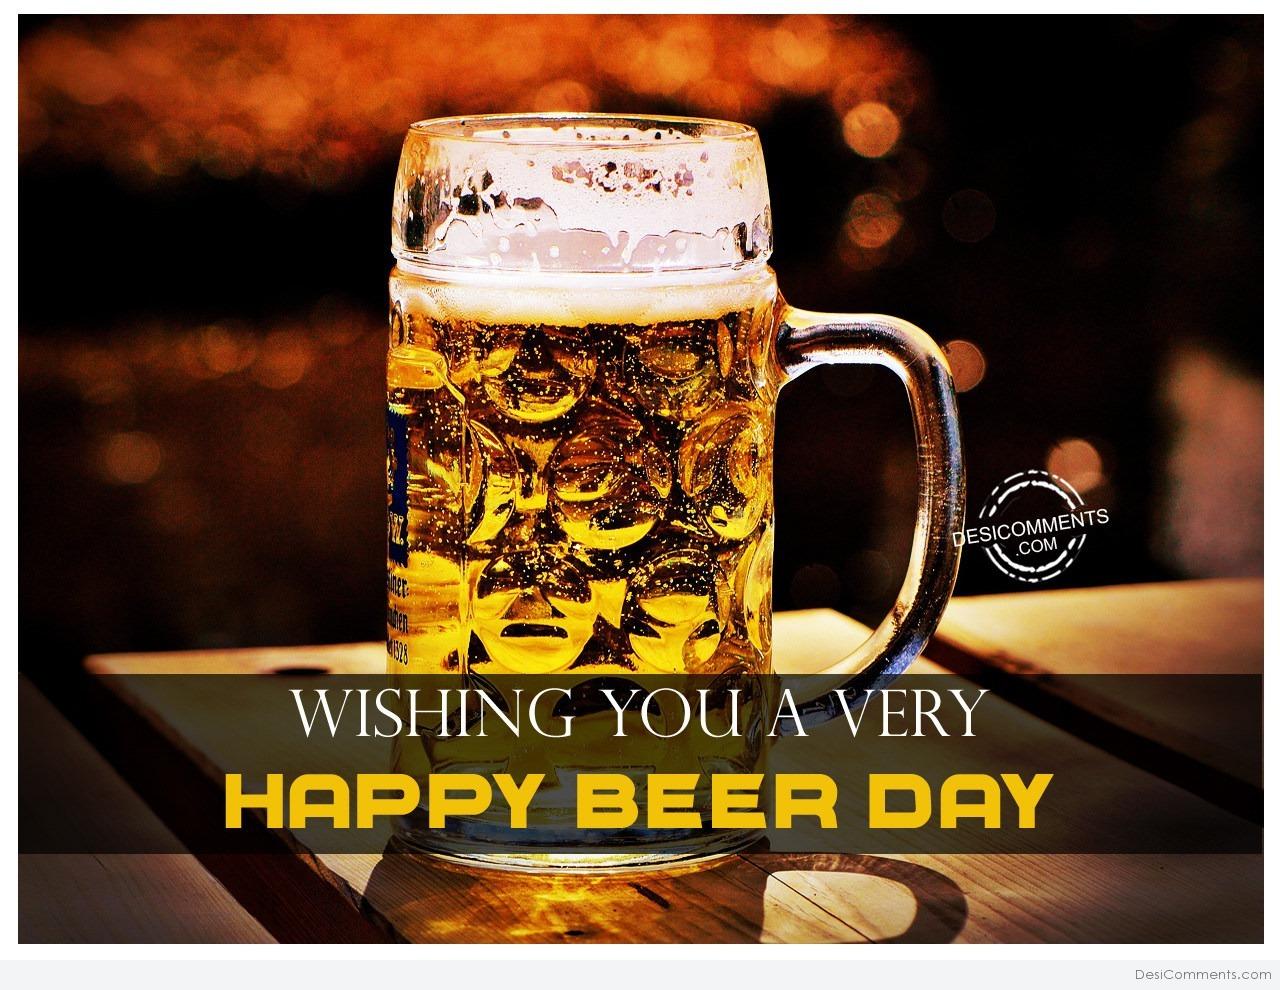 7 Beer Day Pictures Images Photos